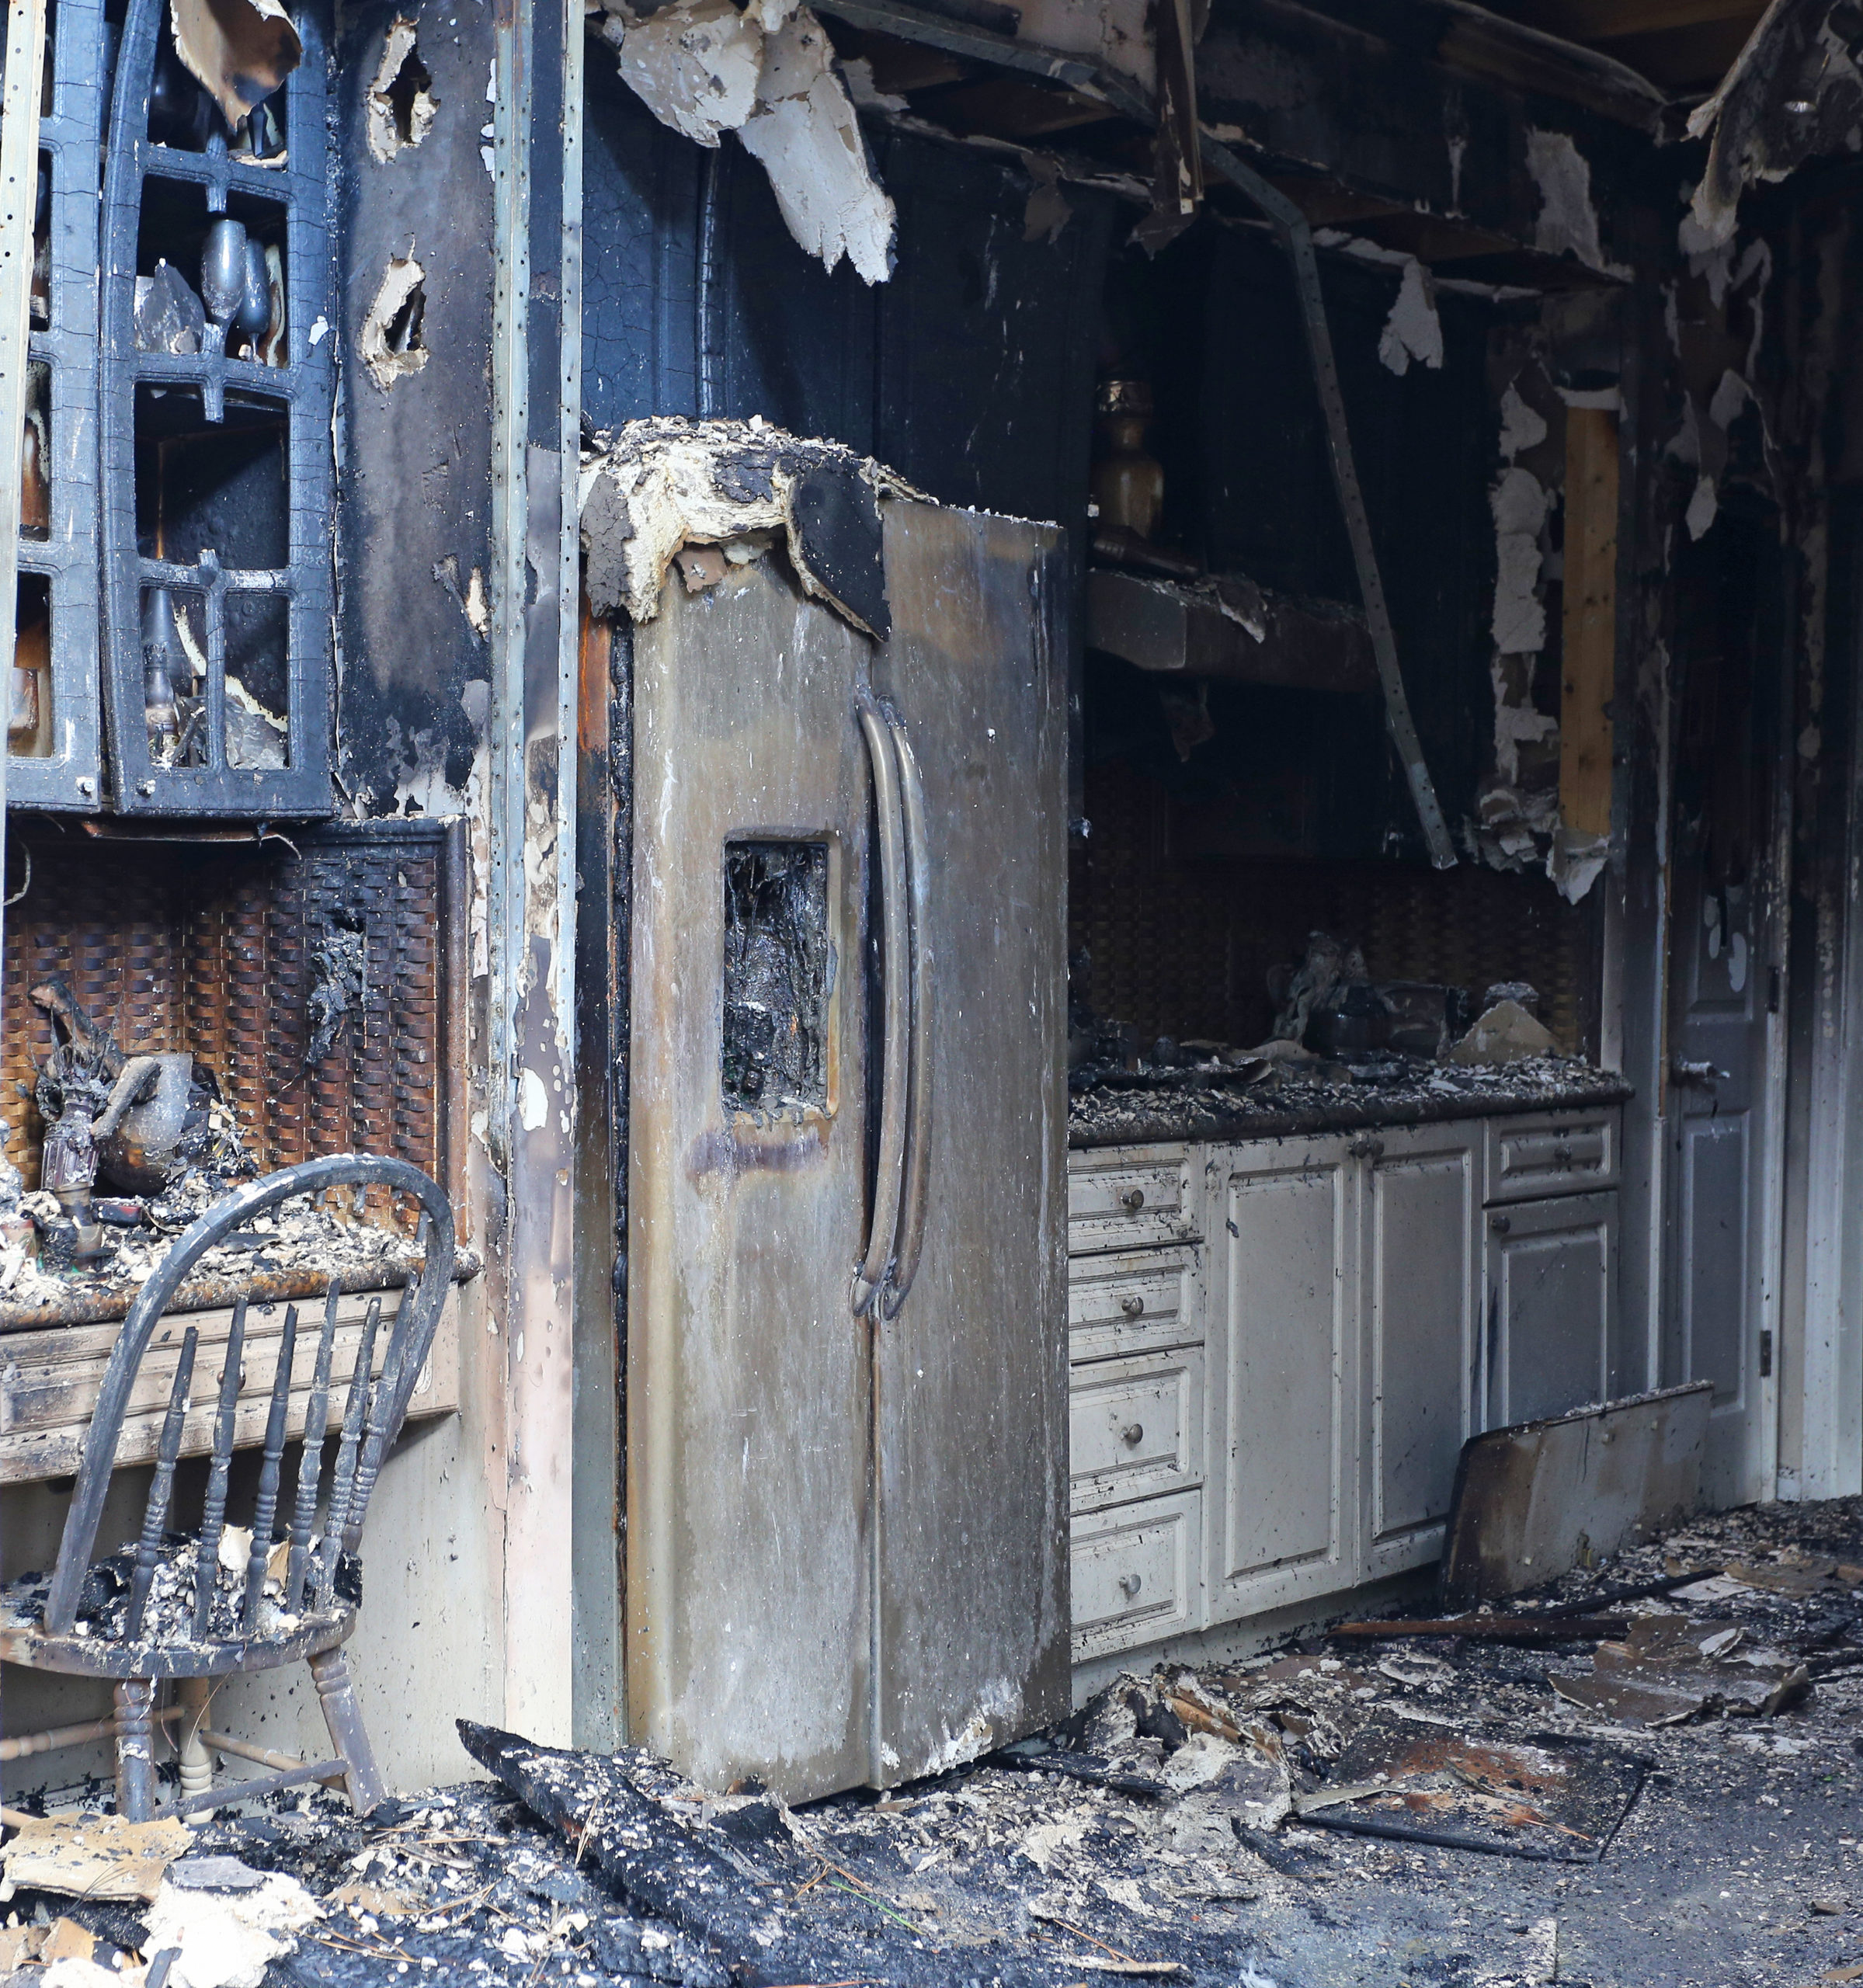 Image of the interior of a home or office following a fire showing burned walls, appliances, cabinets and storage, and chairs